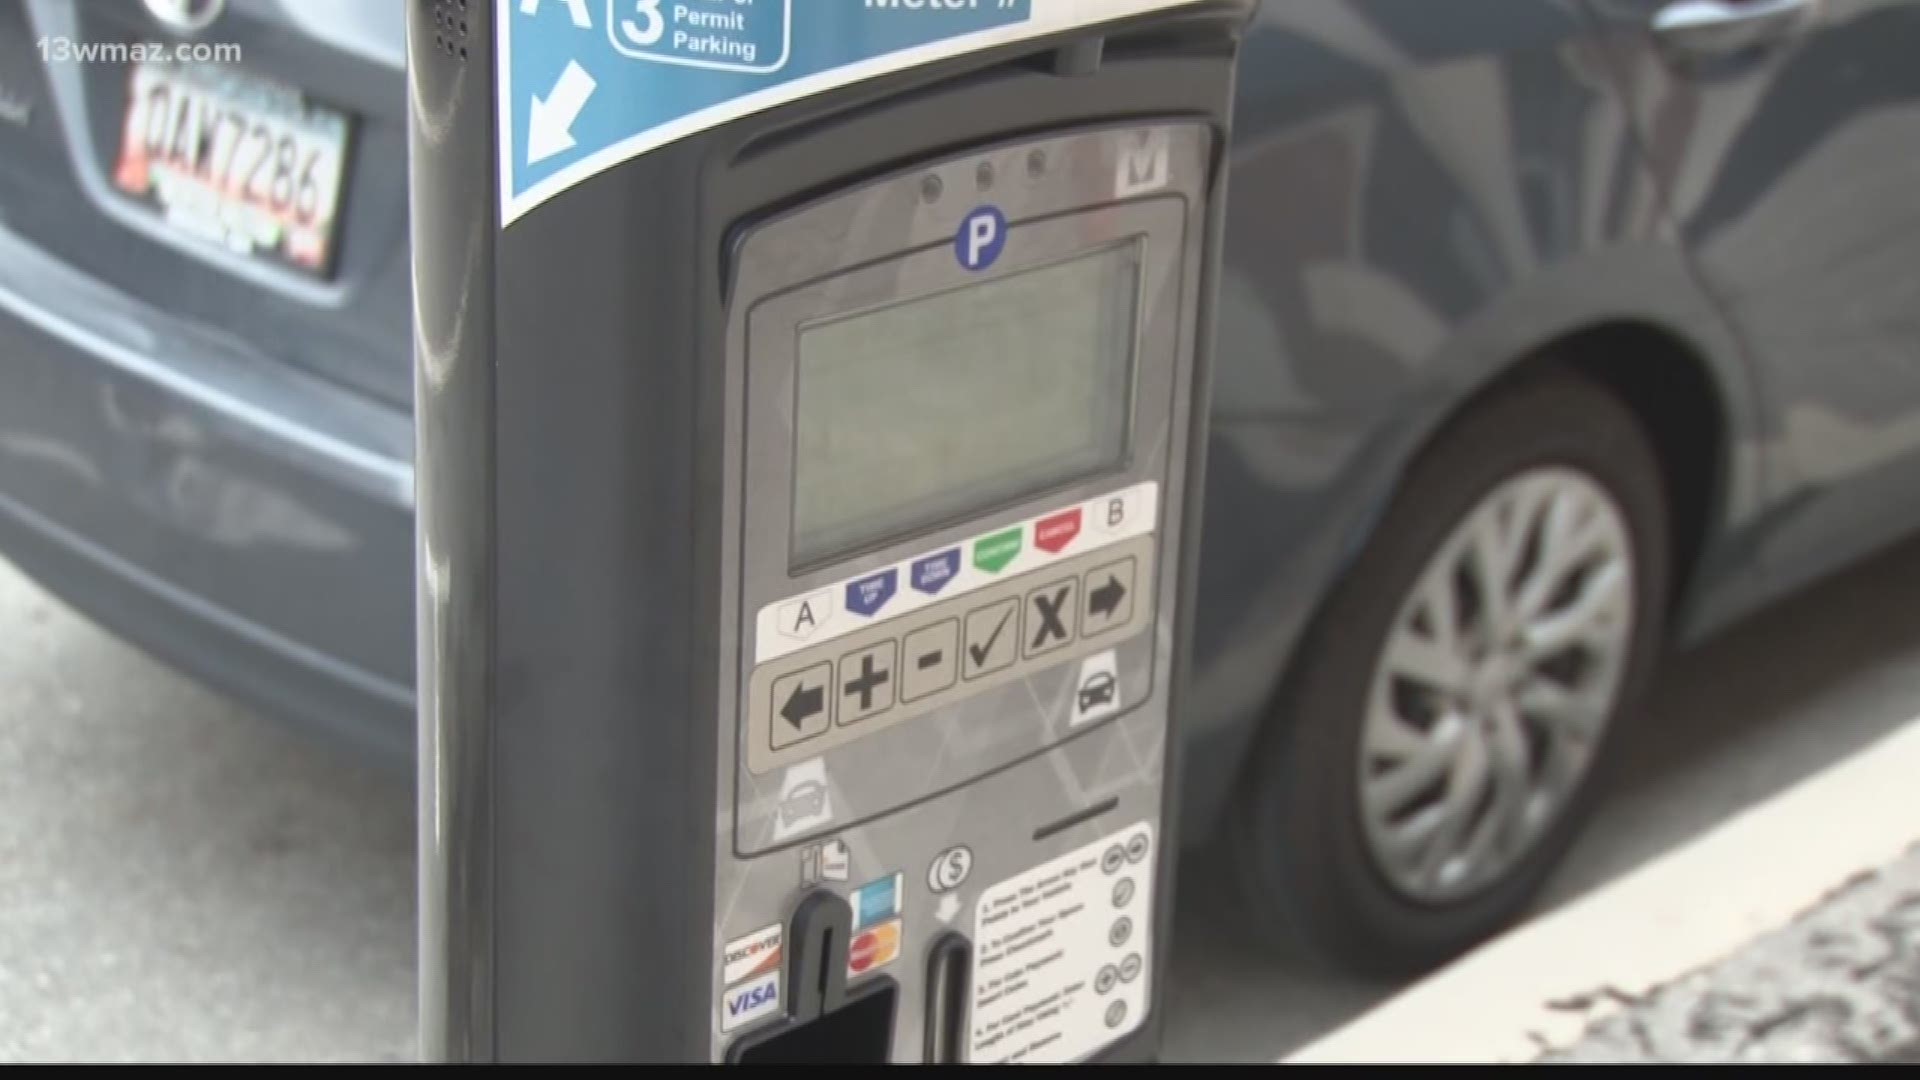 Downtown parking meters cause confusion